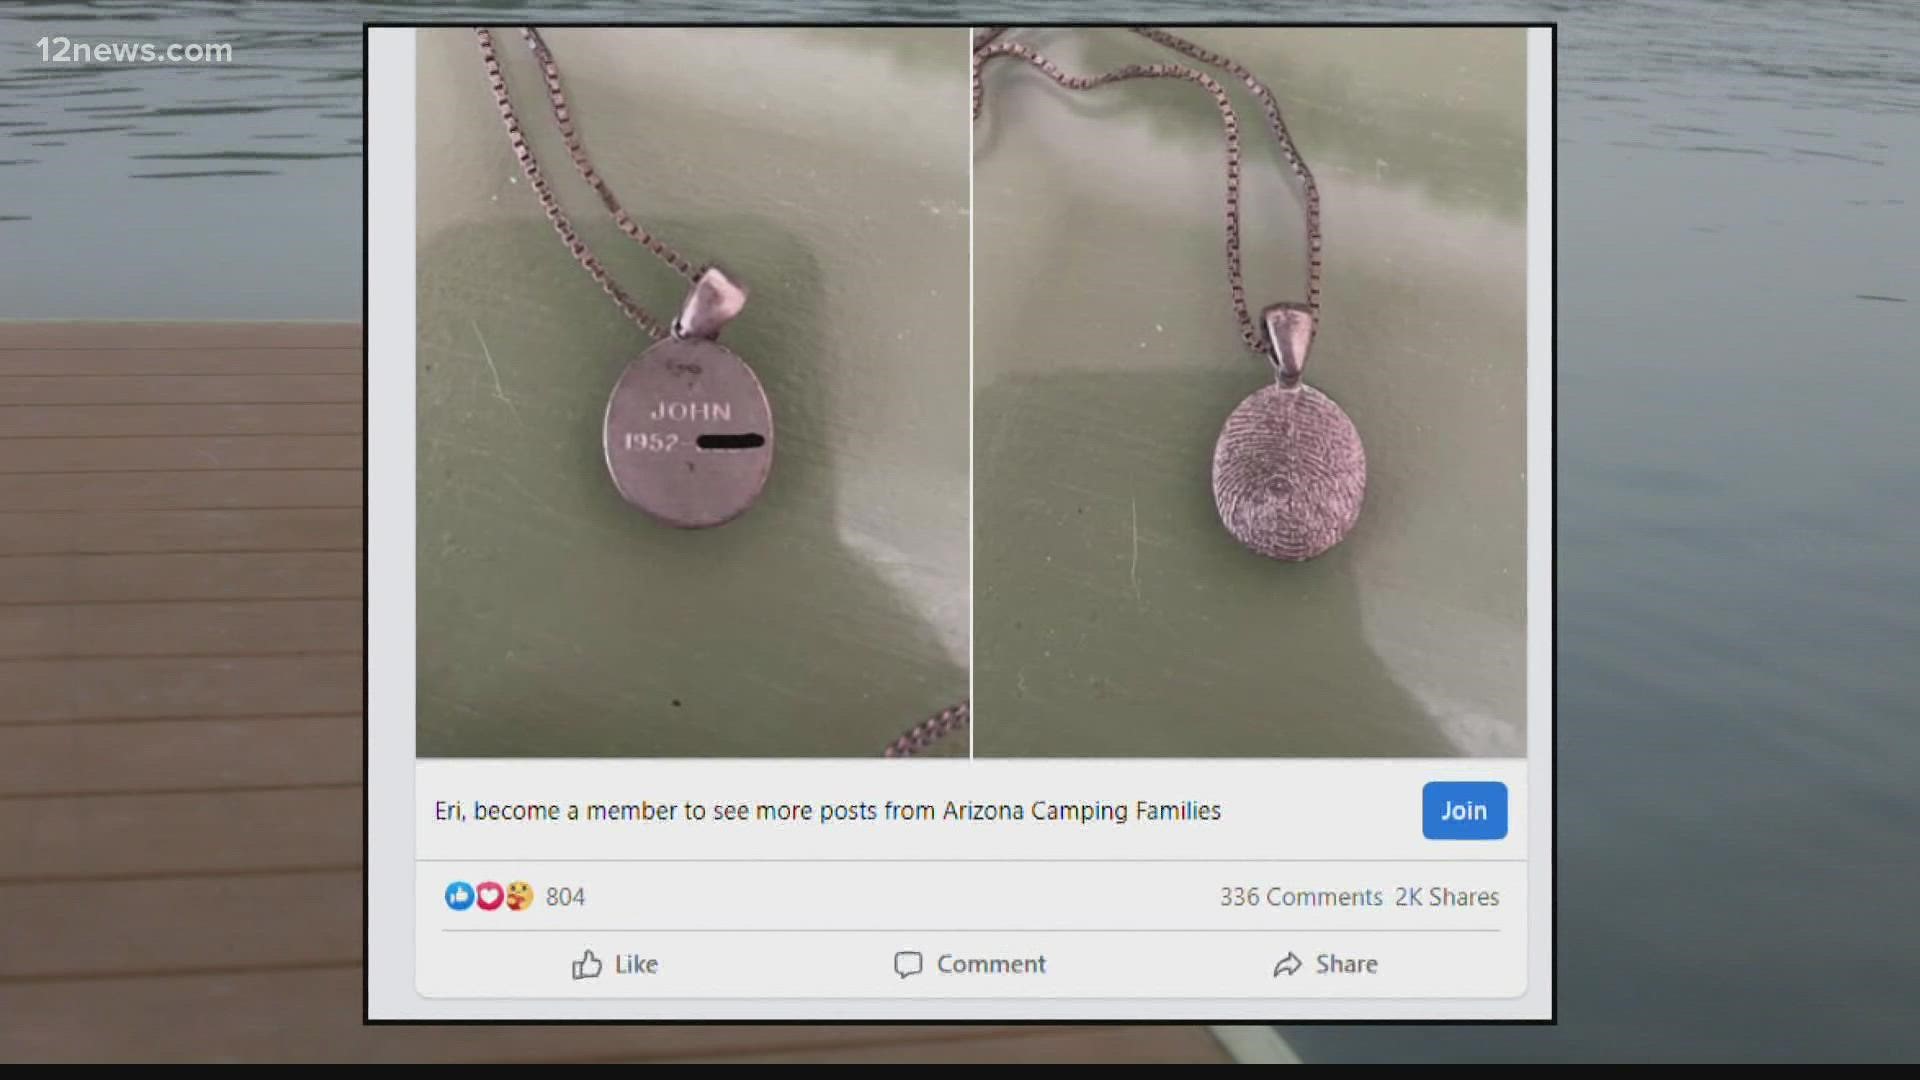 But one necklace is sending a Northern Arizona University student searching for answers in a mystery she's been hanging onto for more than a decade.